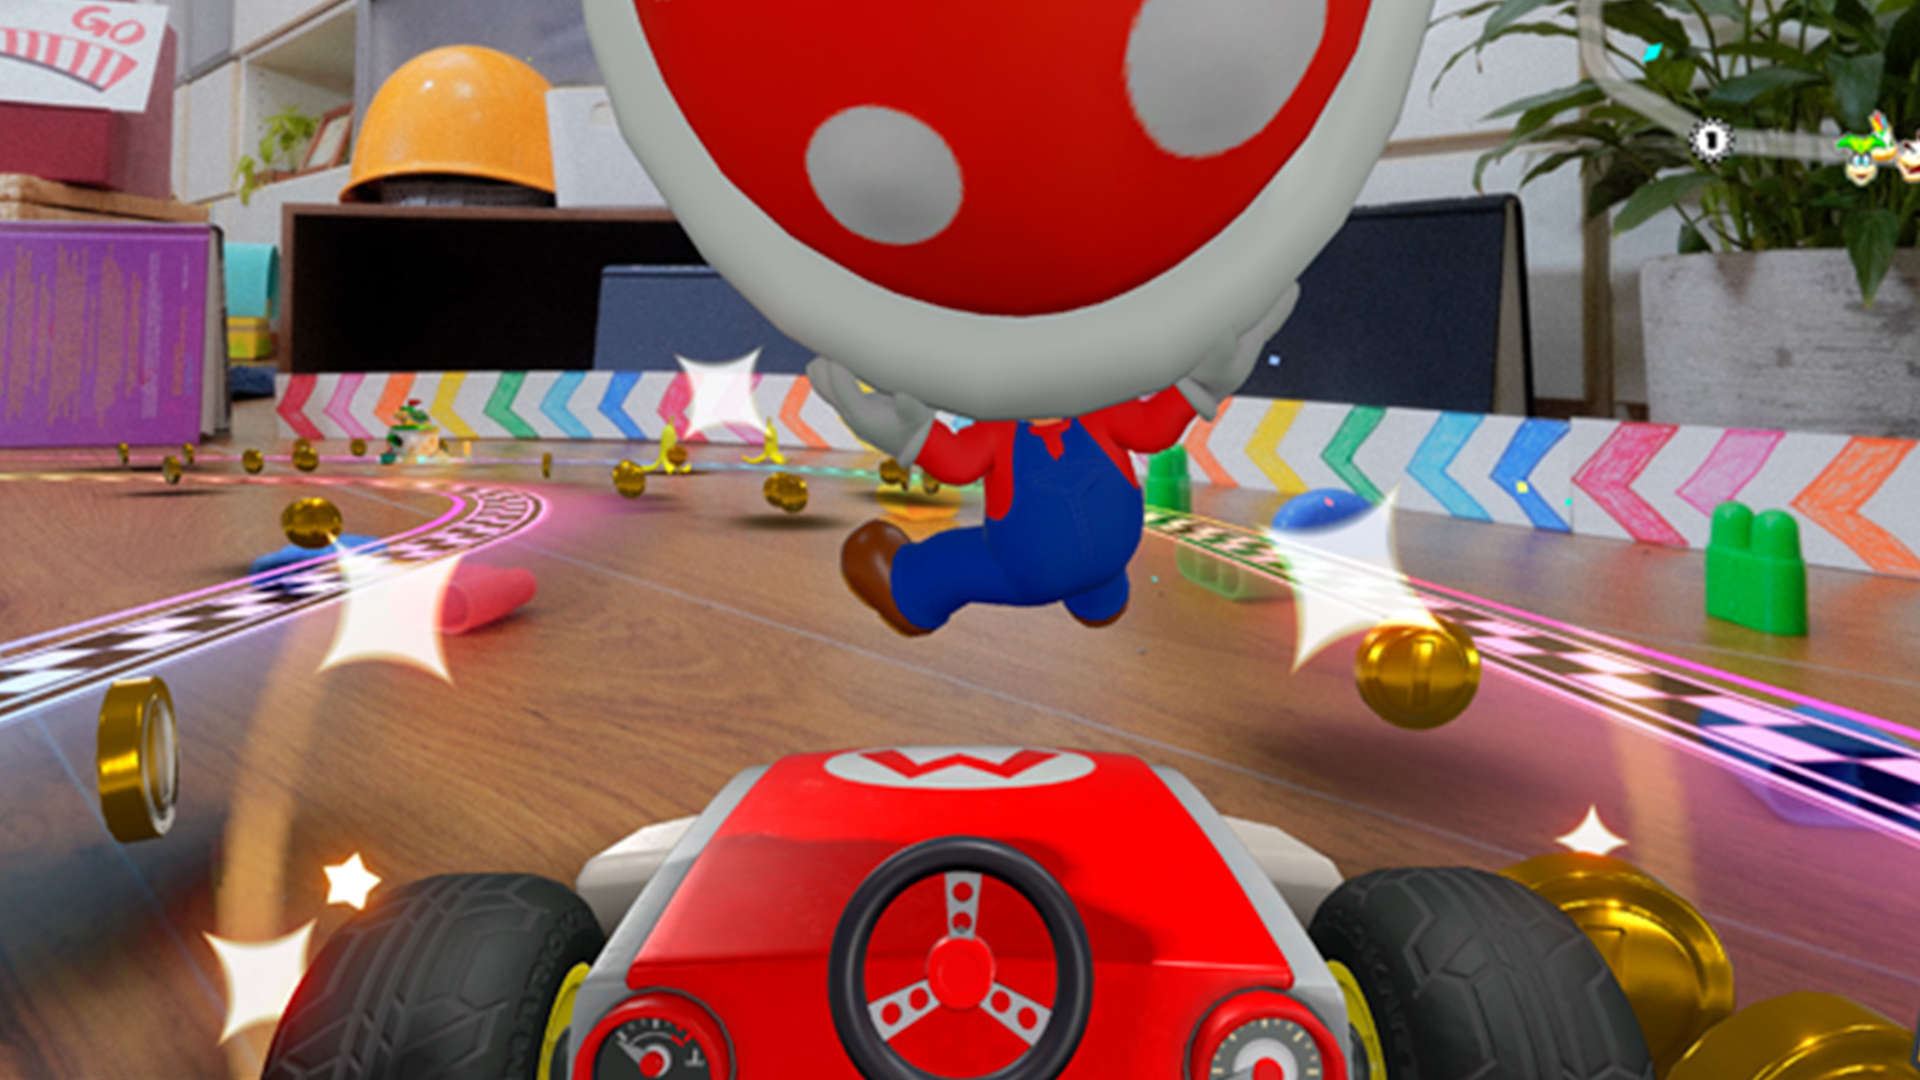 10 Things Parents Should Know About 'Mario Kart Live: Home Circuit